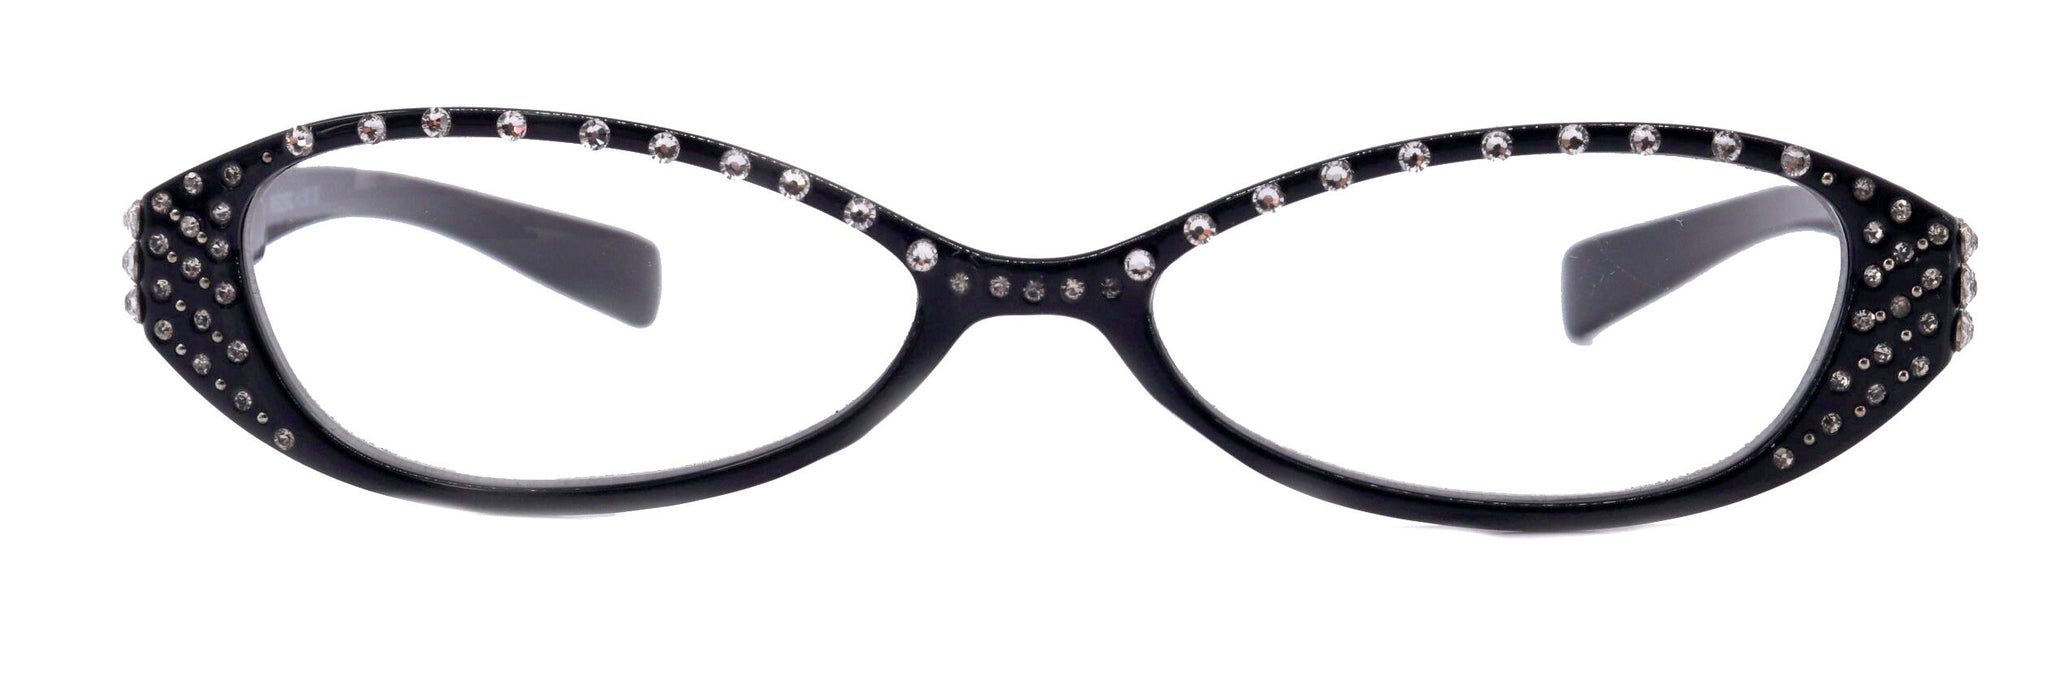 Lucky, (Bling) Women Reading Glasses W (Clear) Genuine European Crystals, Magnifying, Cat Eyes (Black) Cat eye NY Fifth Avenue